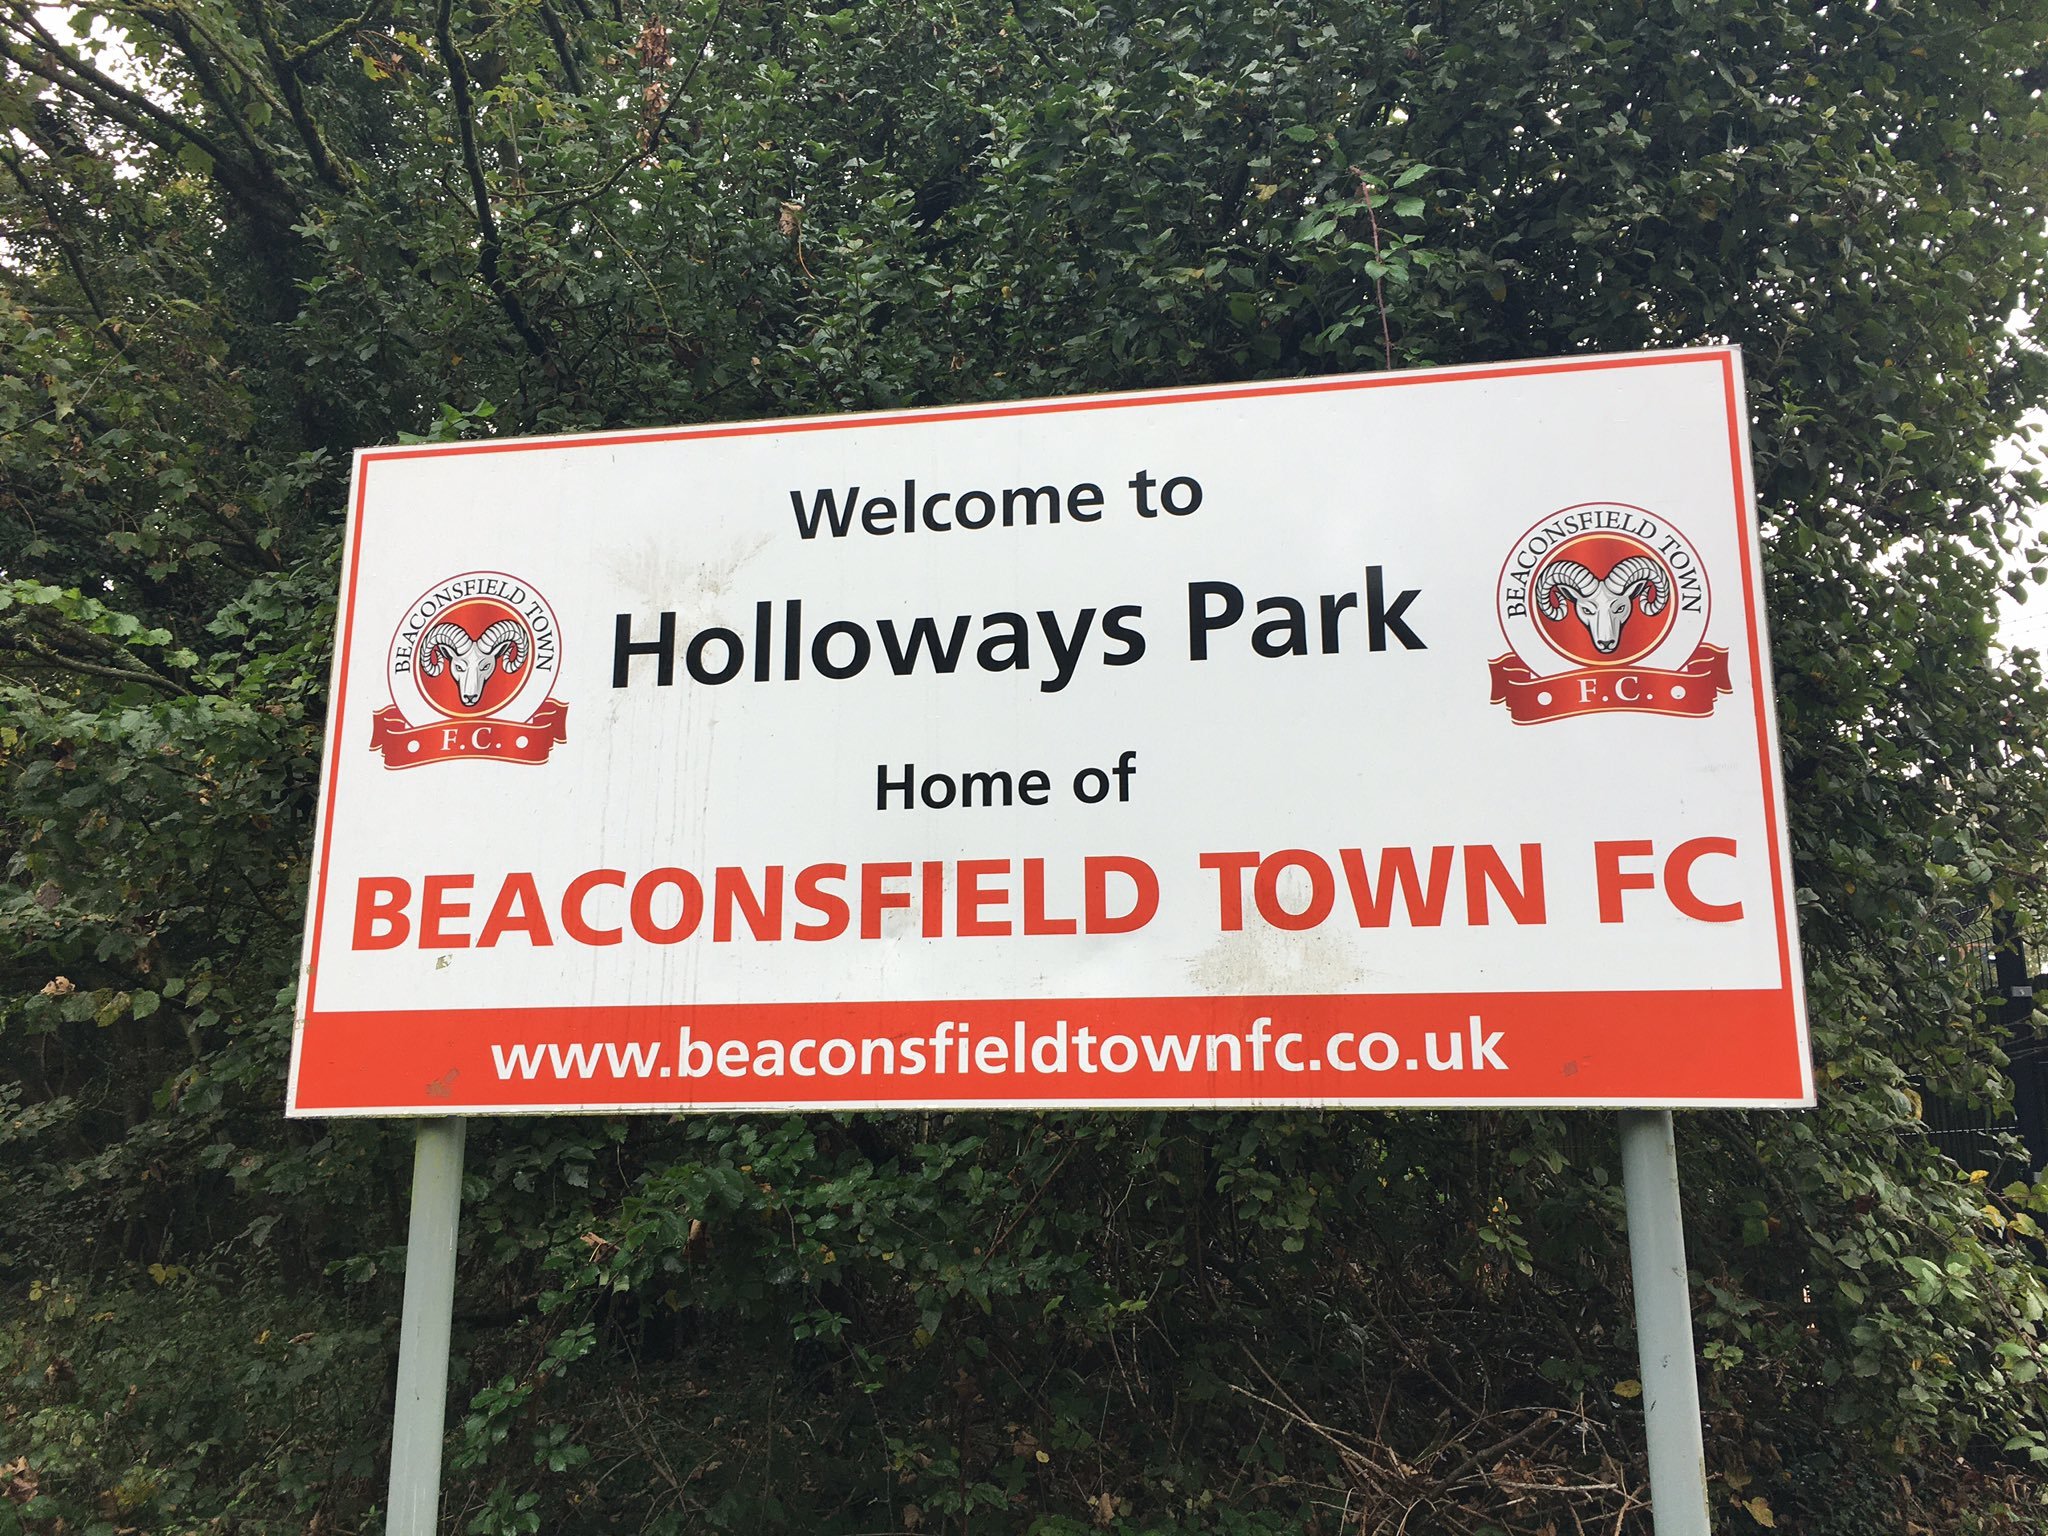 Holloways Park is the home of Beaconsfield Town FC 